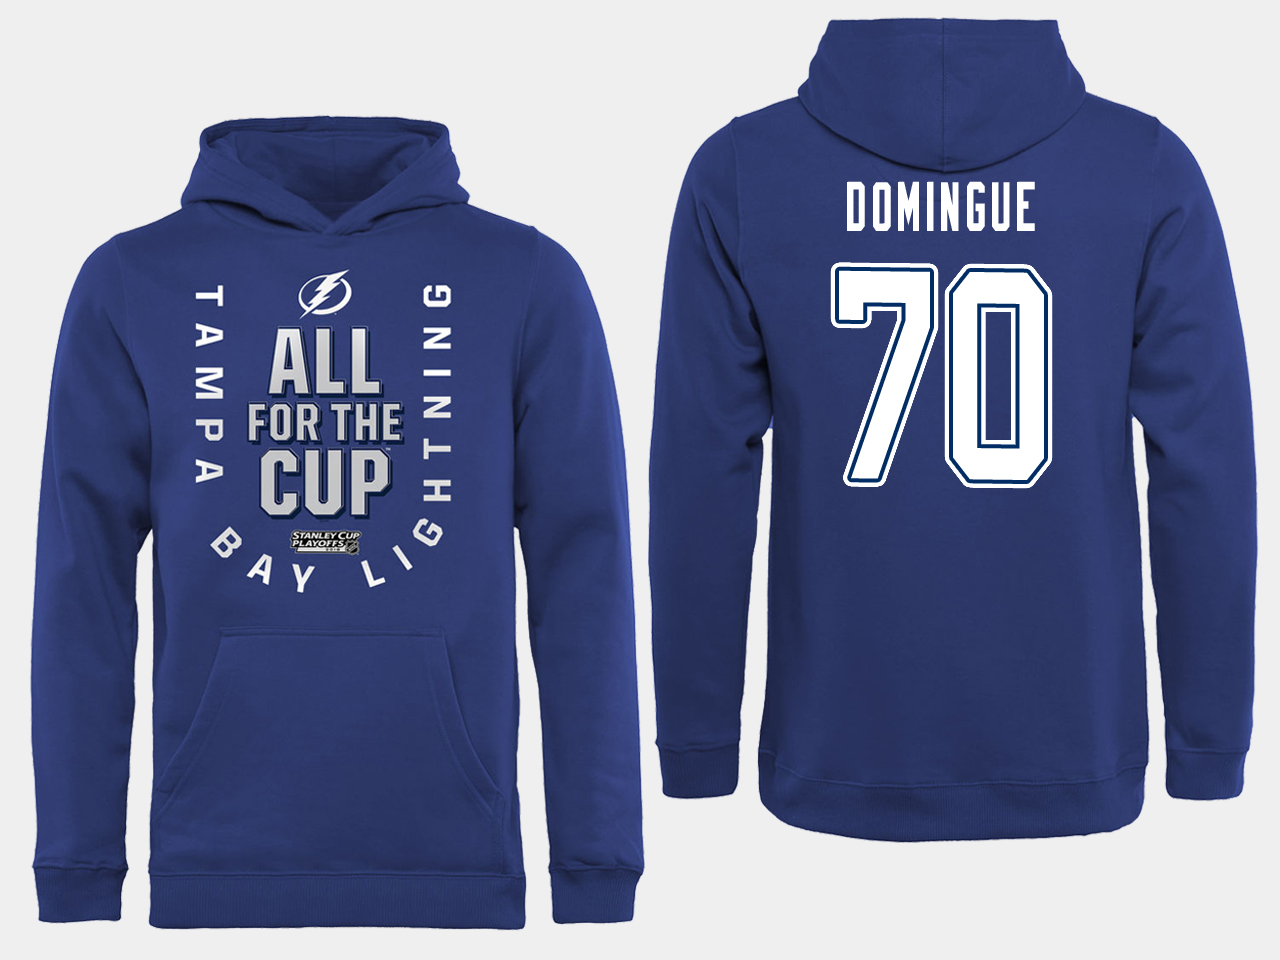 NHL Men adidas Tampa Bay Lightning 70 Domingue blue All for the Cup Hoodie